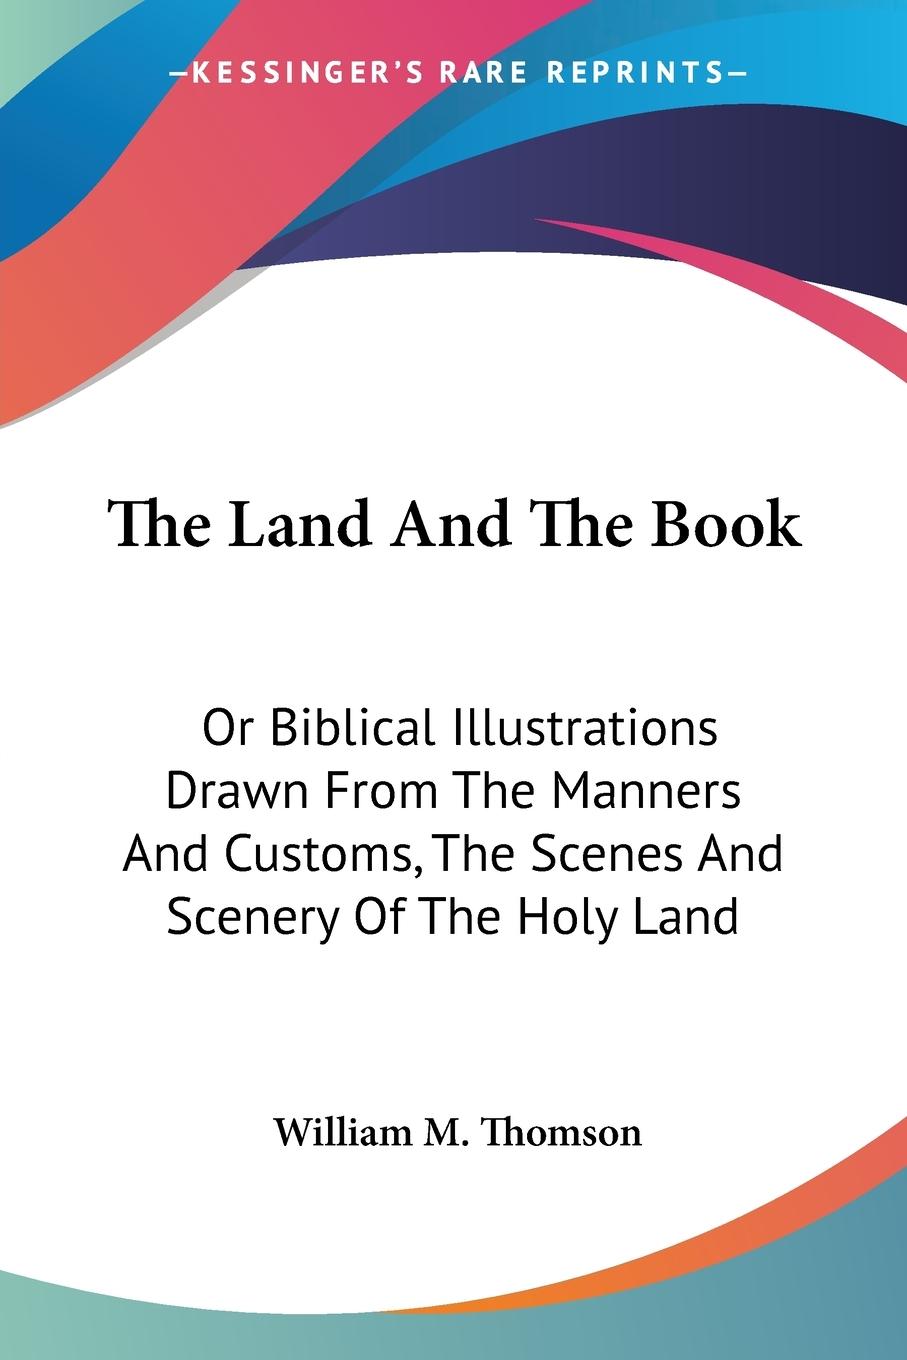 The Land And The Book - Thomson, William M.